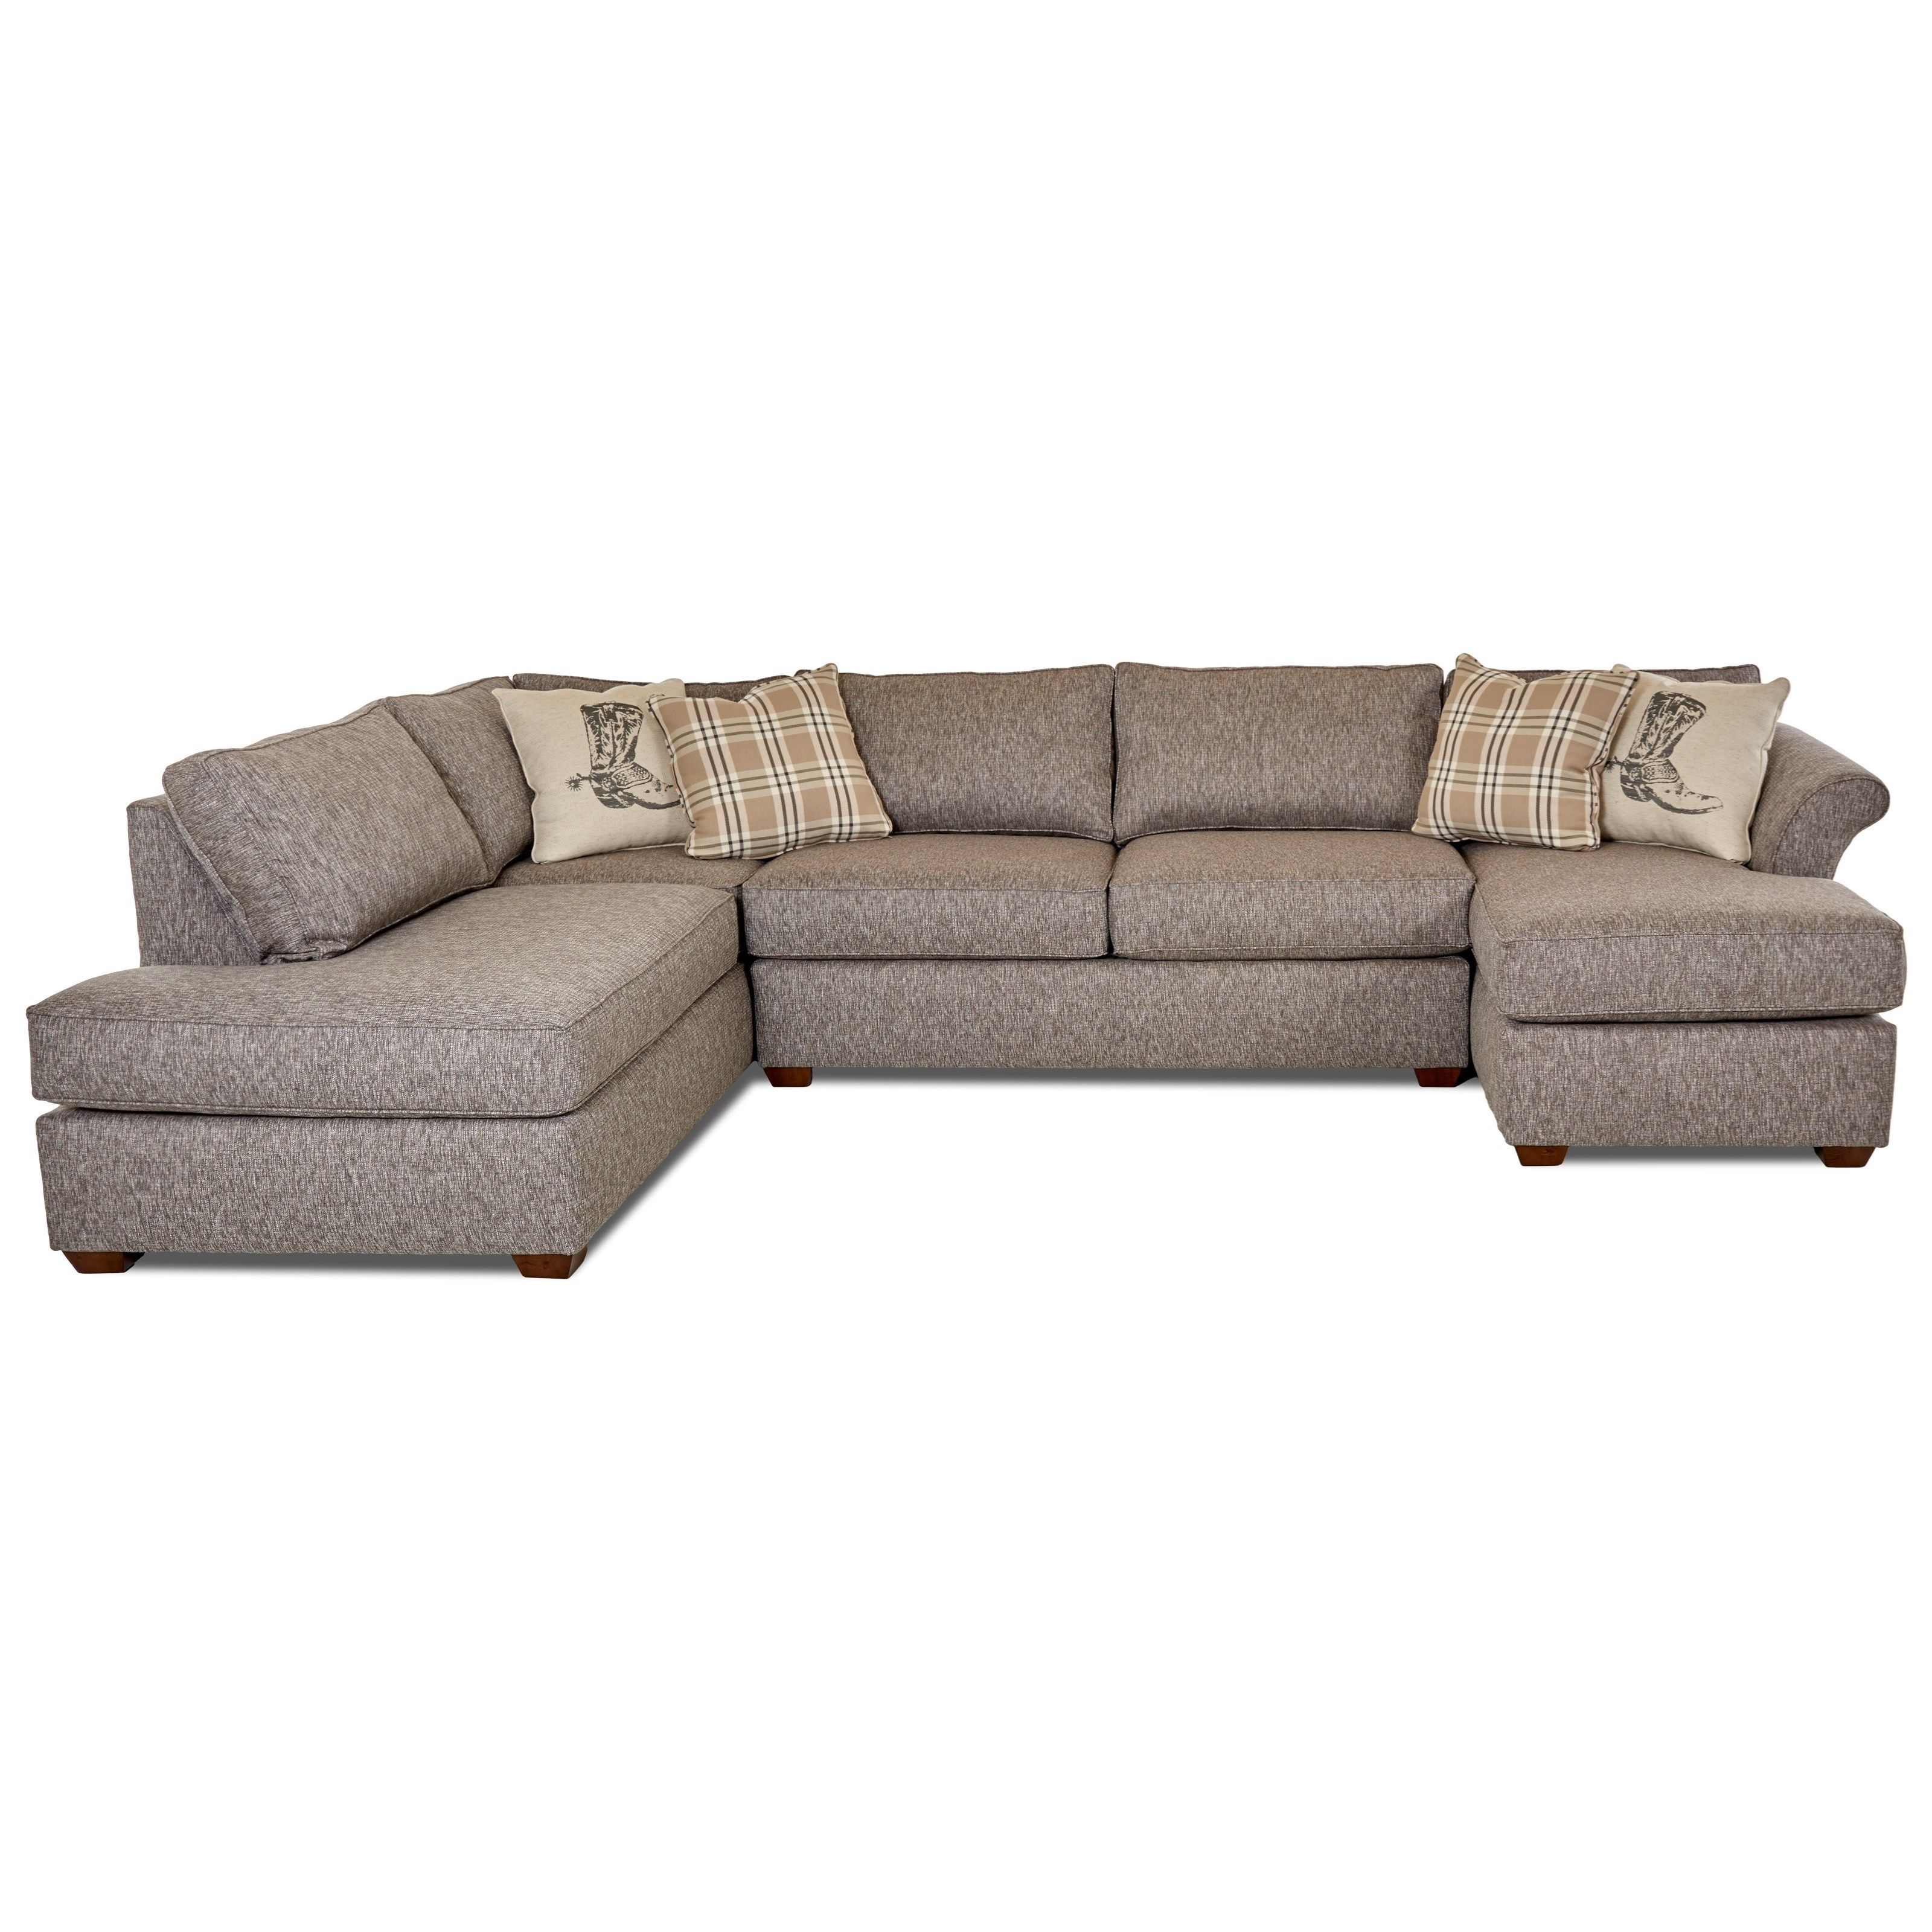 Klaussner Jaxon Three Piece Sectional Sofa With Flared Arms And Laf With Sierra Foam Ii 3 Piece Sectionals (View 17 of 30)